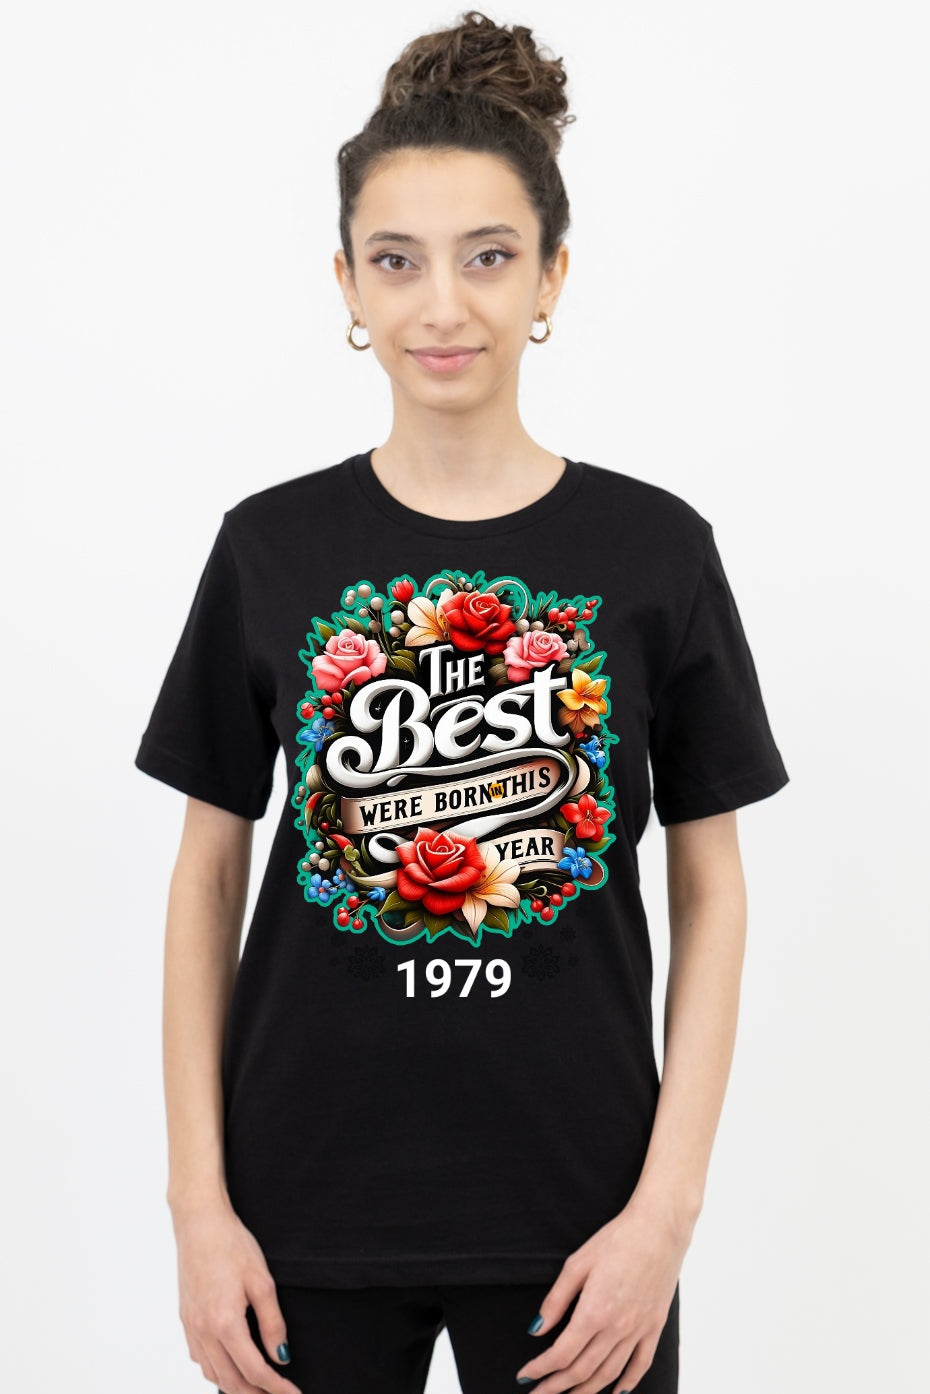 The Best Were Born Tees